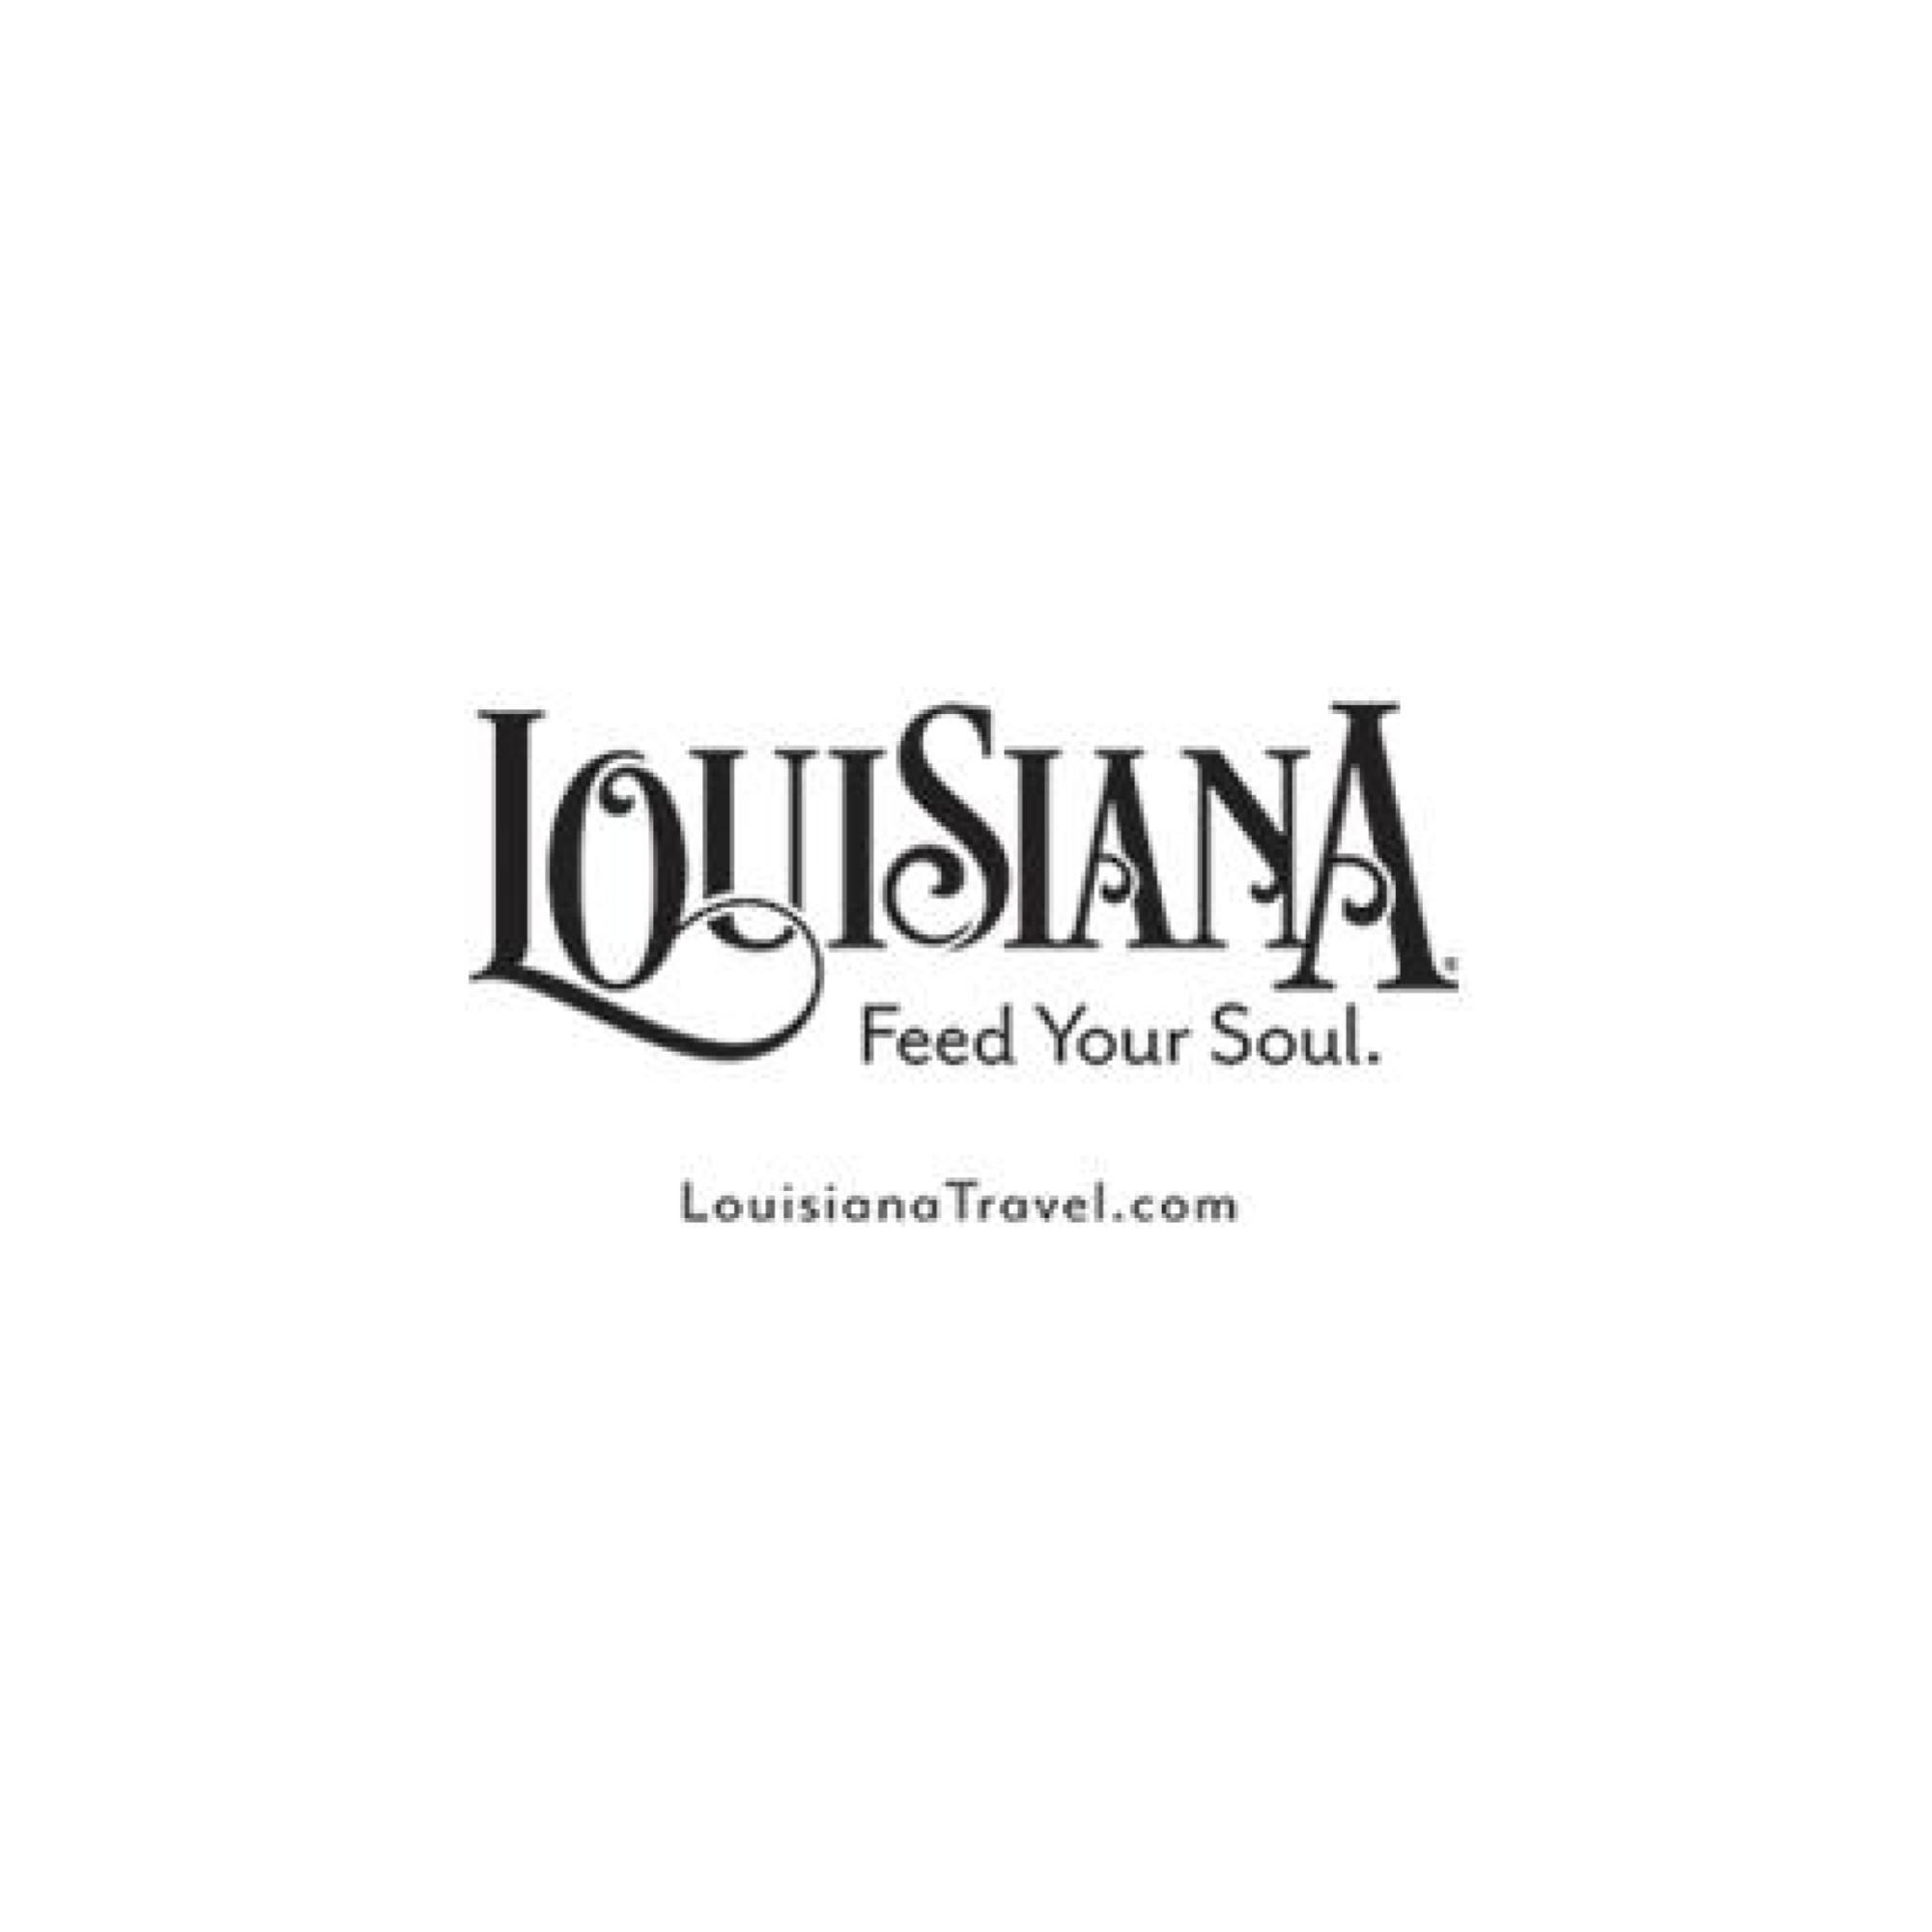 Louisiana: A culture of cooking